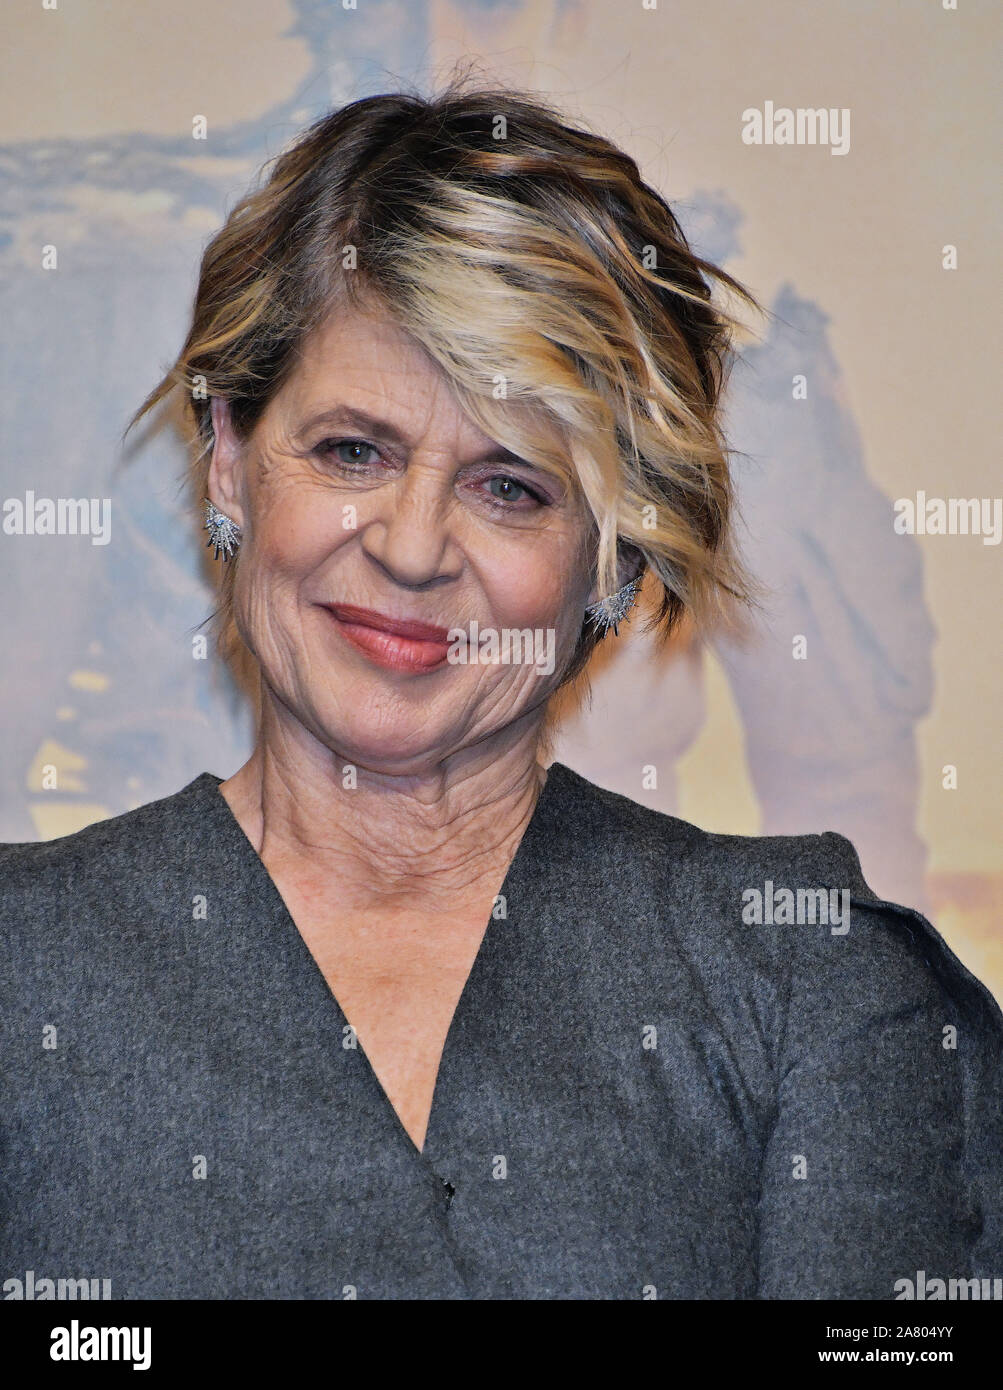 Tokyo, Japan. 05th Nov, 2019. Actress Linda Hamilton attends the press conference for the film 'Terminator: Dark Fate' in Tokyo, Japan on Tuesday, November 5, 2019. 'Terminator: Dark Fate' set 25 years after the events of 'Terminator 2', filming took place from June to November 2018 in Hungary, Spain and the United States. James Cameron return to production and actress Linda Hamilton play Sara Conner for the first time in 28 years. This film open November 8 in Japan. Photo by MORI Keizo/UPI Credit: UPI/Alamy Live News Stock Photo